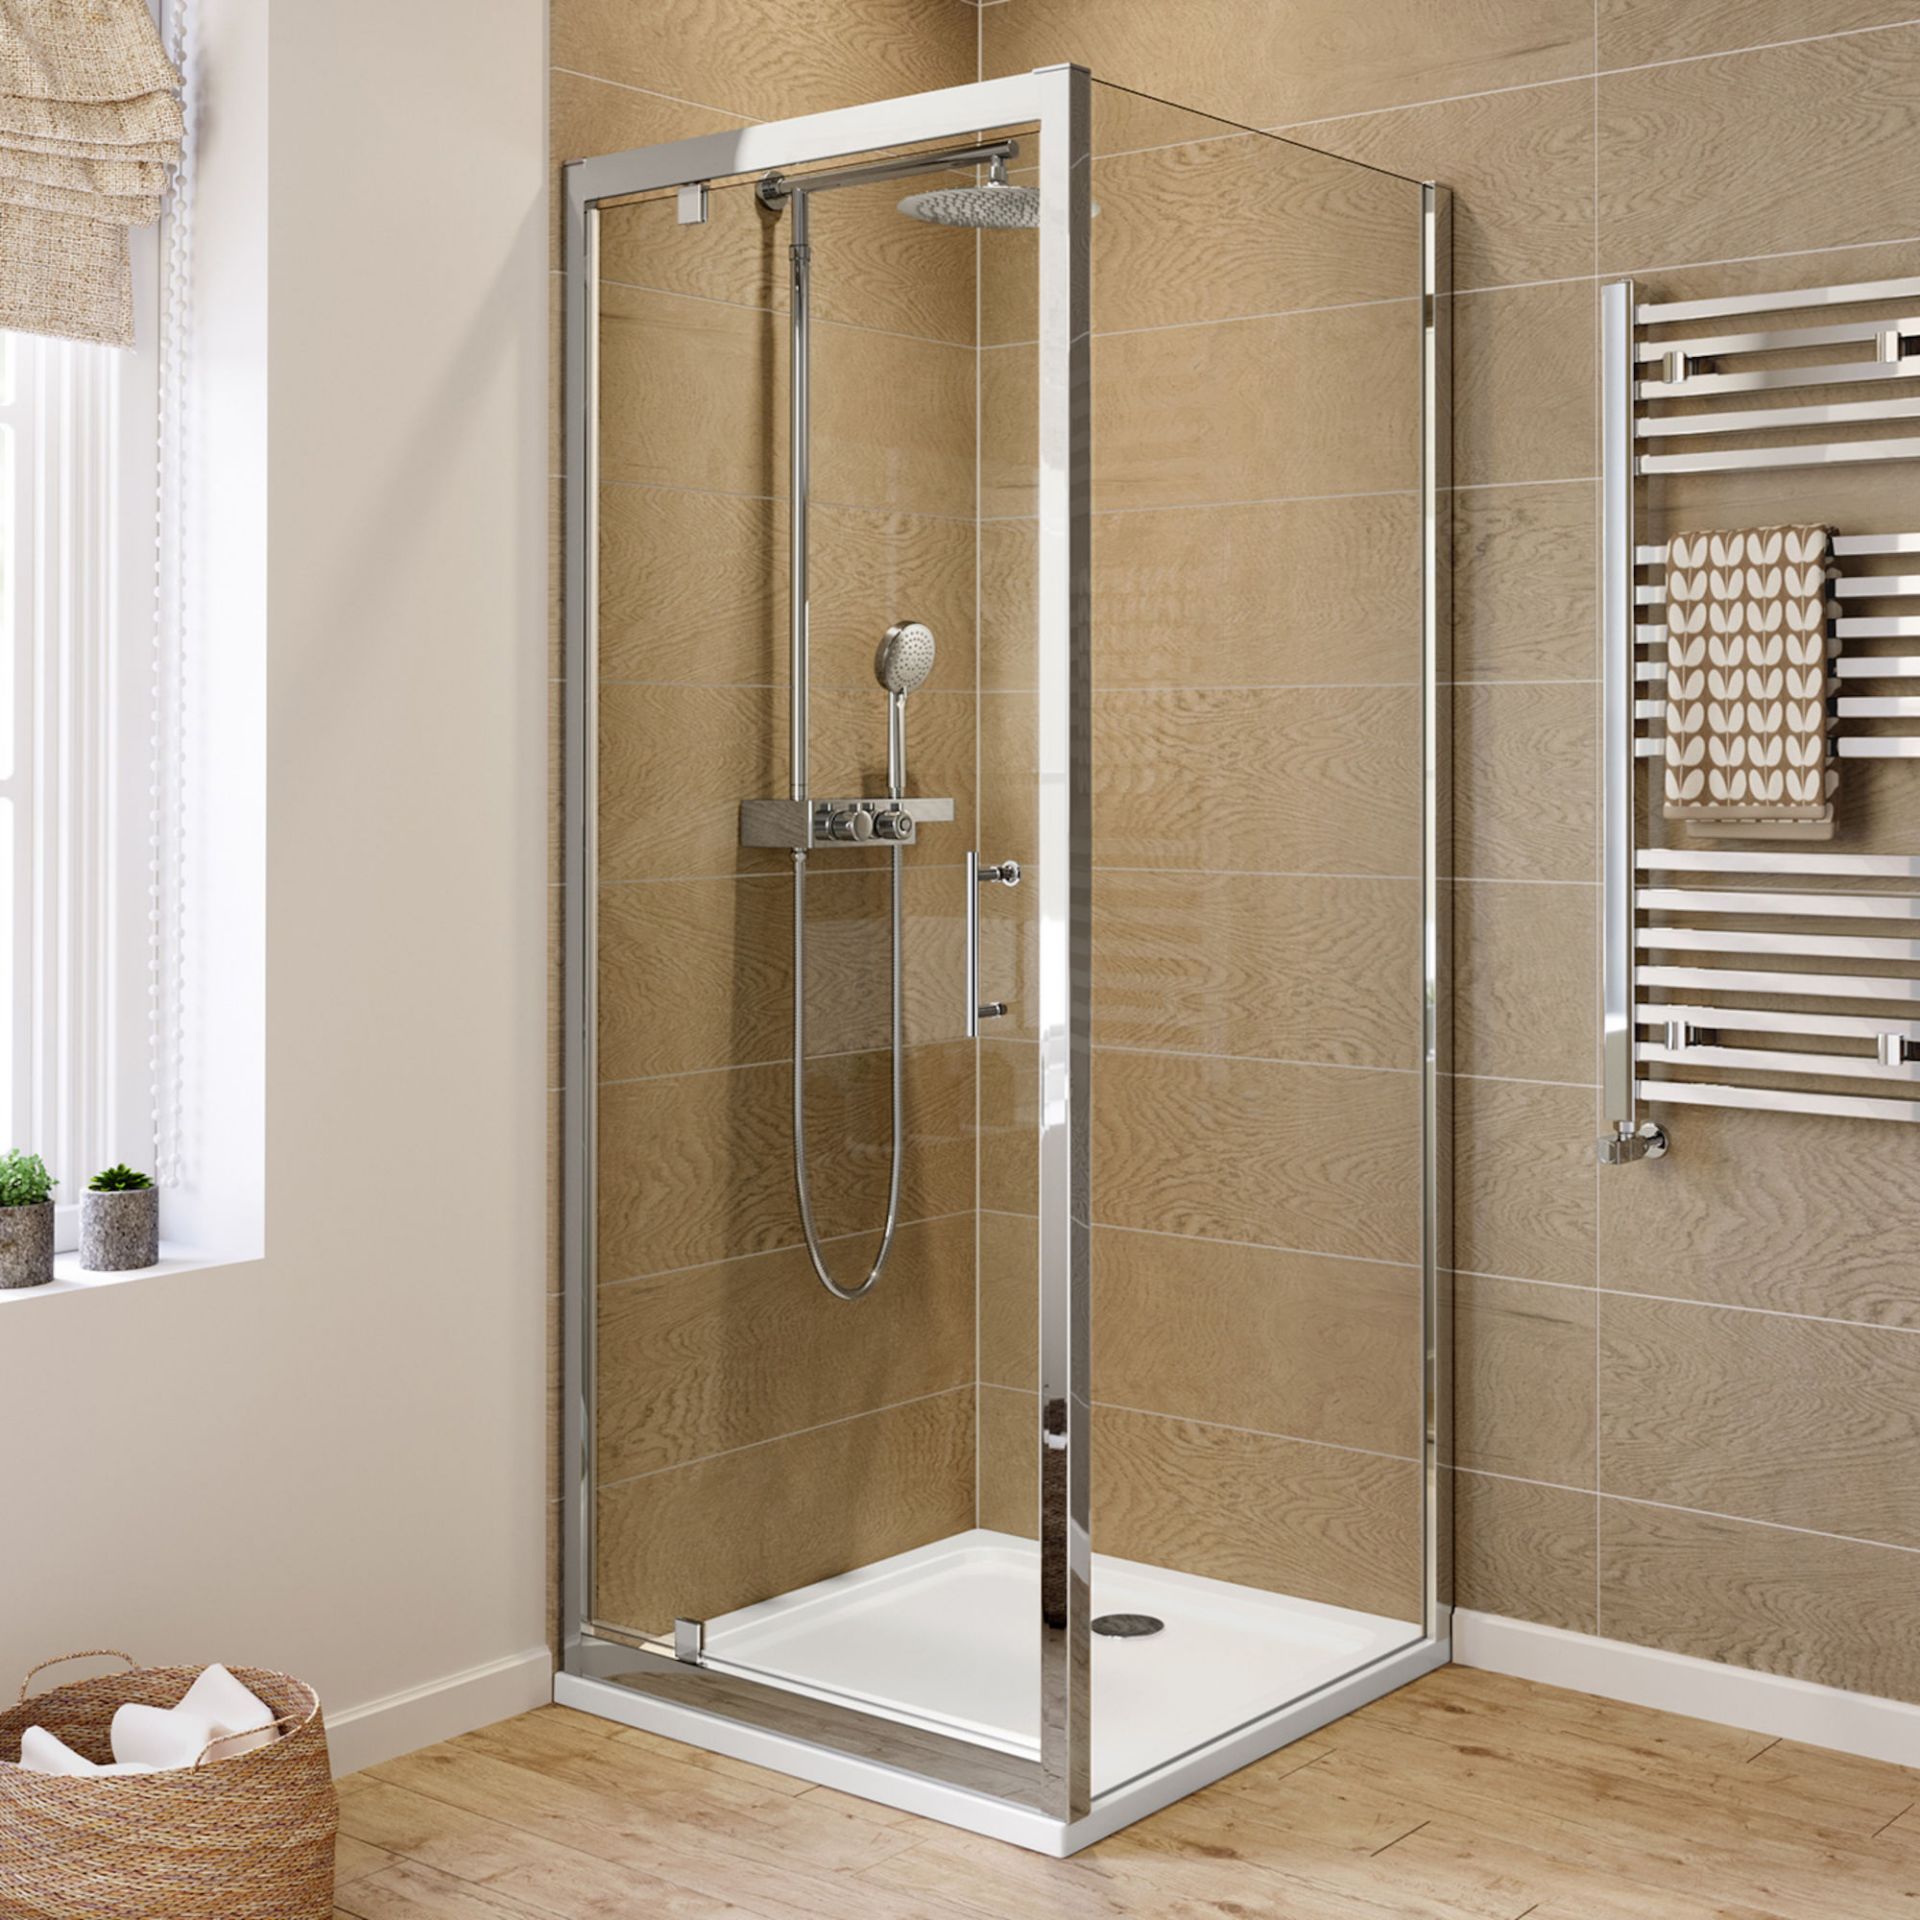 (CS80) 760x760mm - 6mm - Elements Pivot Door Shower Enclosure. RRP £299.99. 6mm Safety Glass Fully